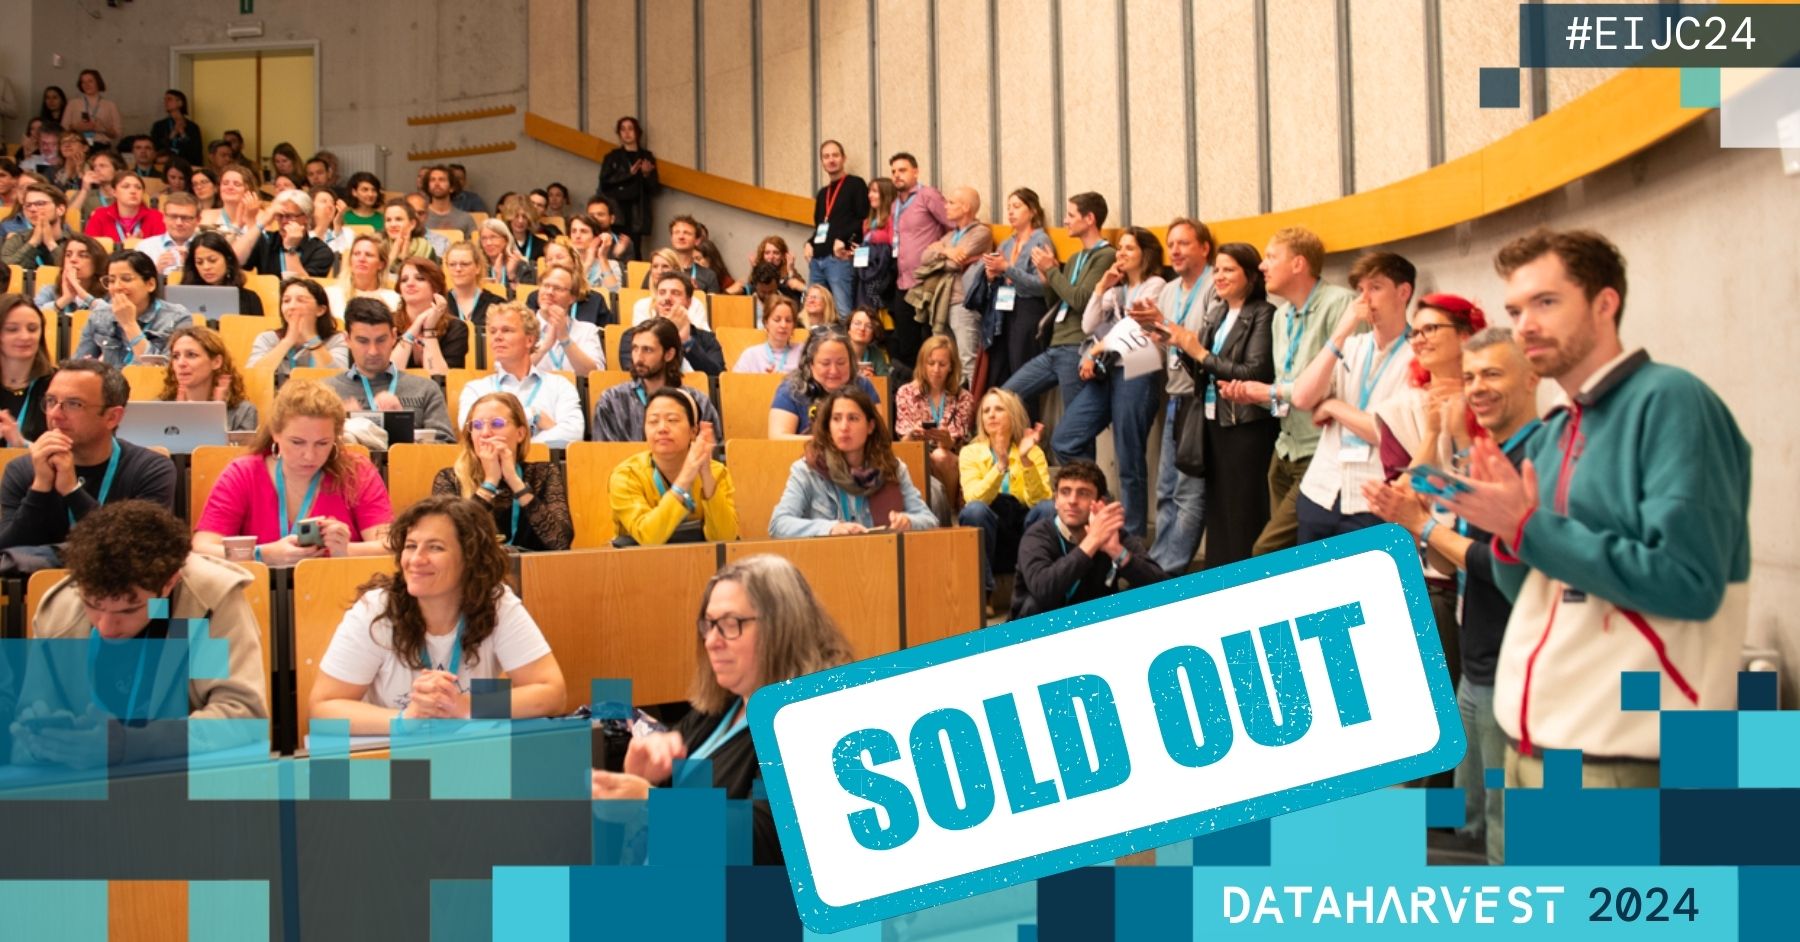 Dataharvest 2024 sold out